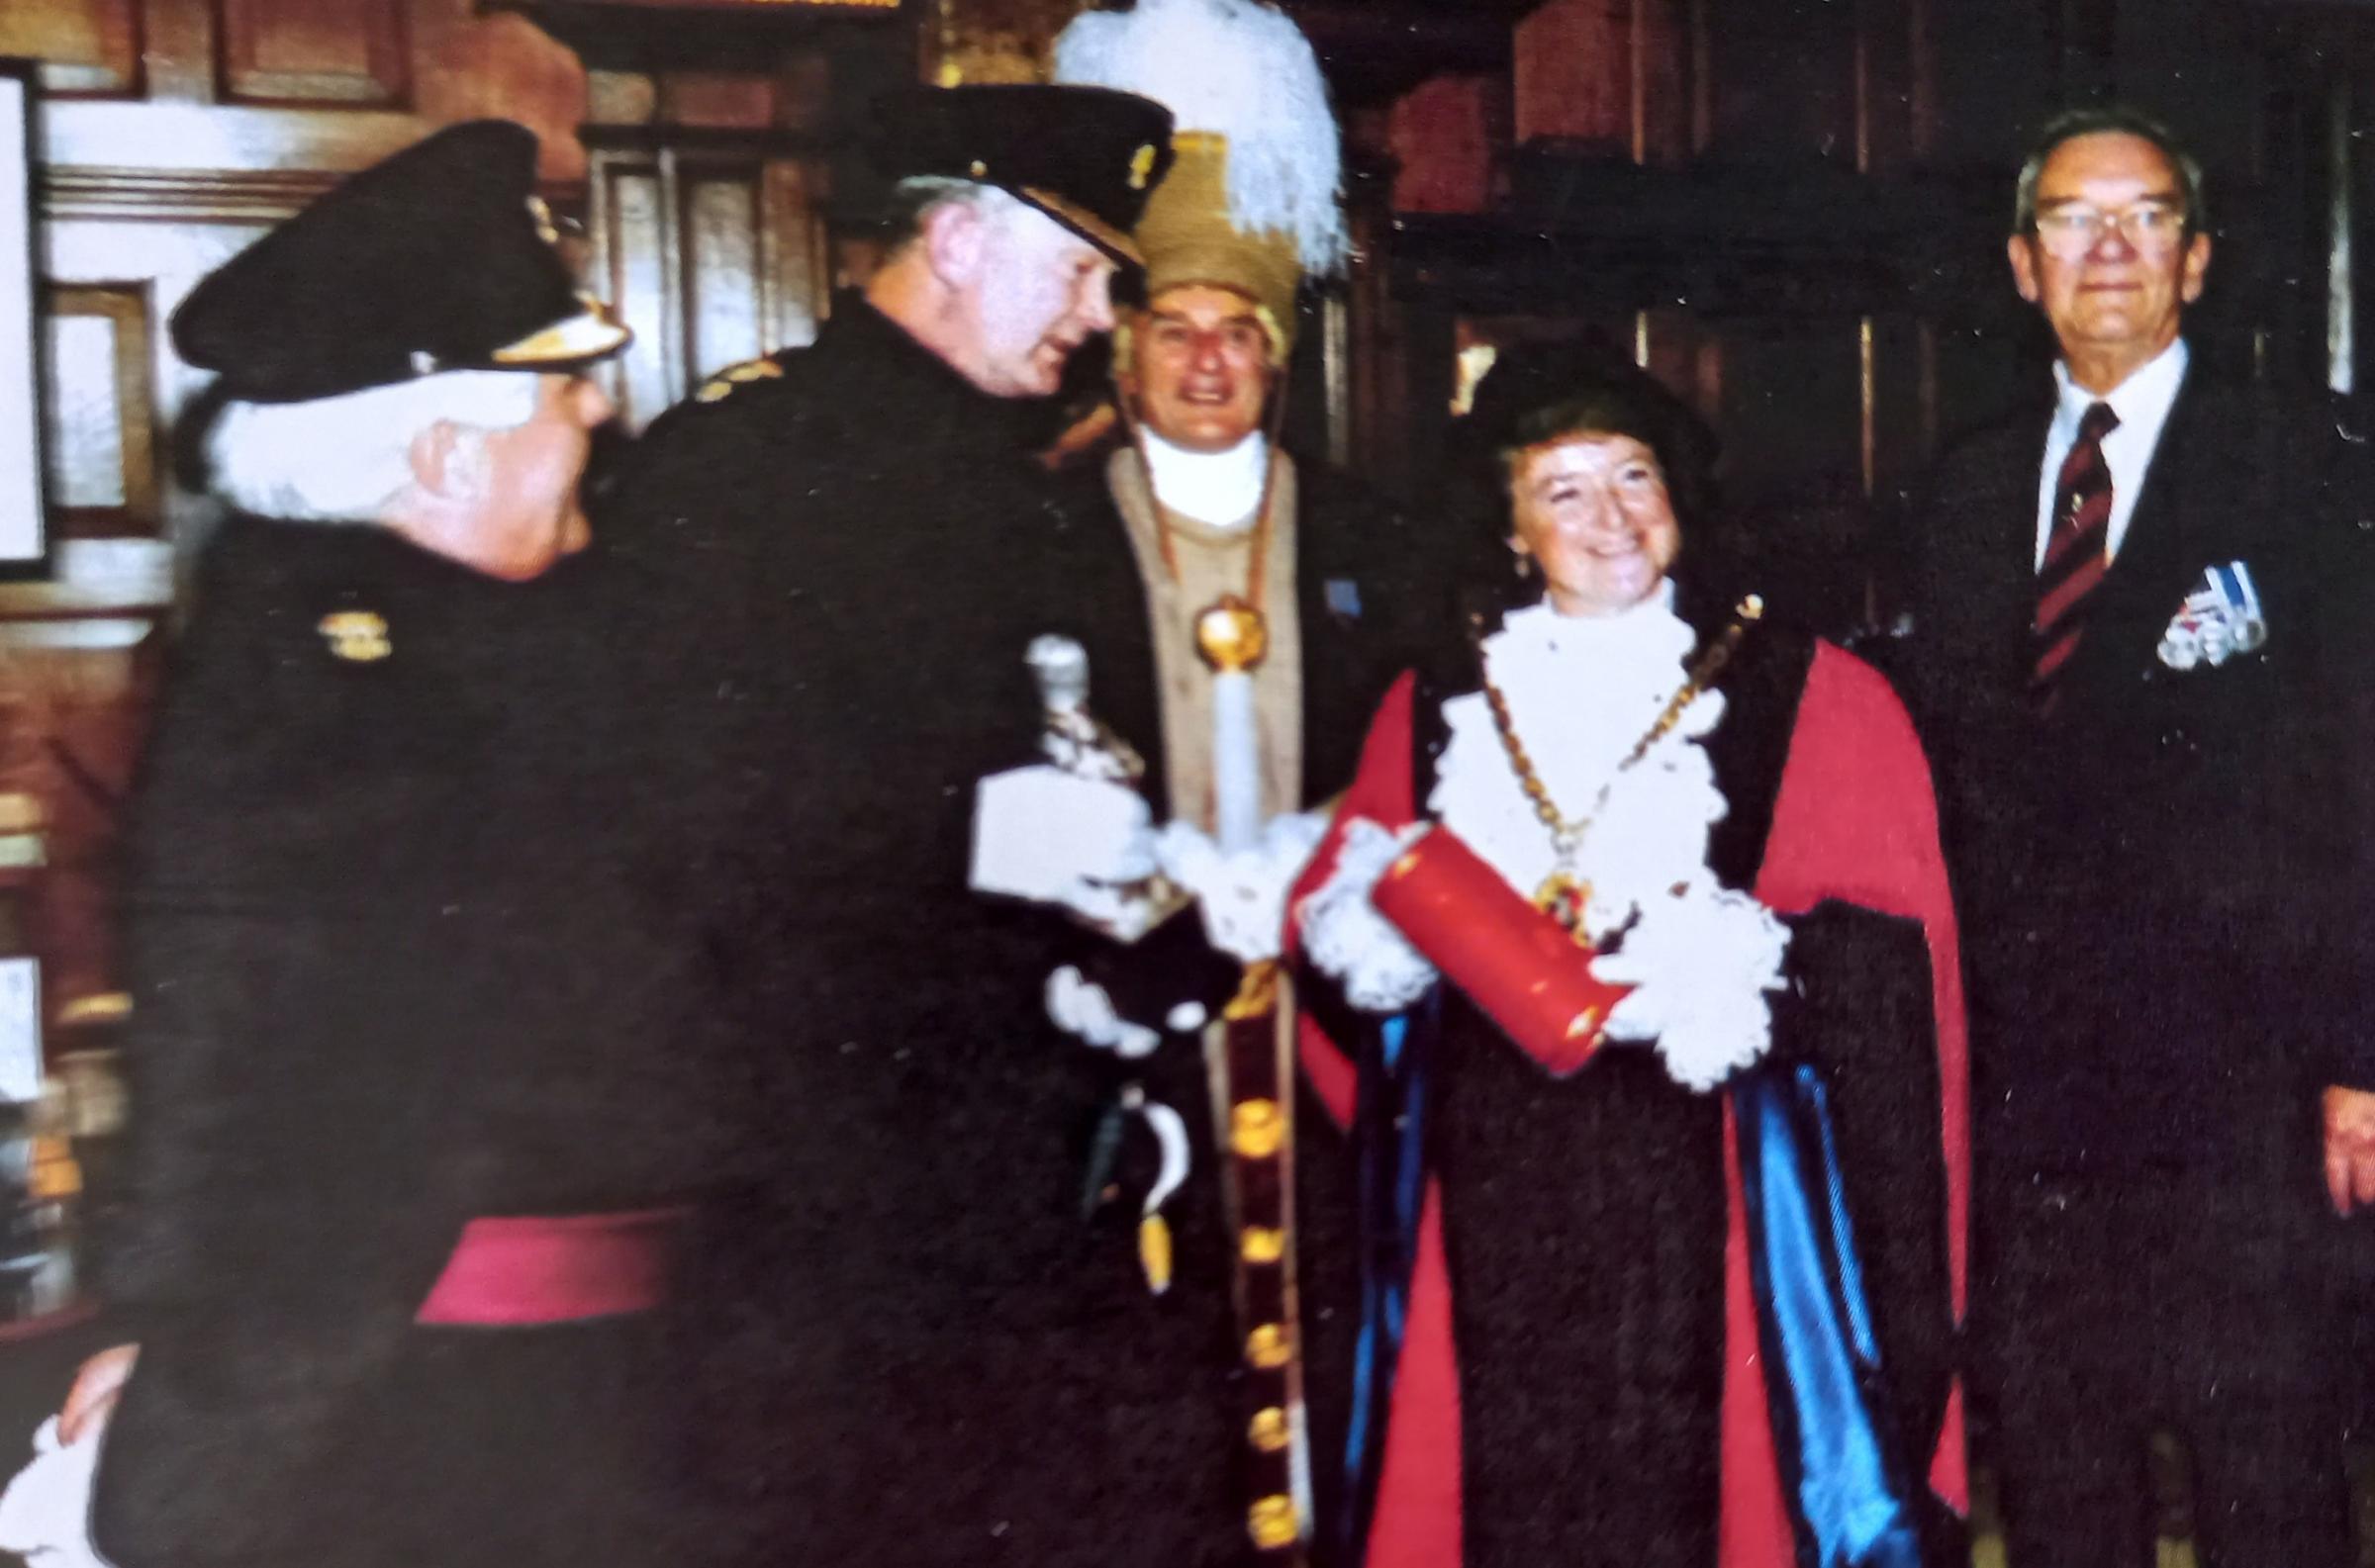 The Grenadier Guards receiving the Freedom of the City of Worcester in 1999. Mayor Jo Hodges presents the scroll to Major General Evelyn Webb-Carter